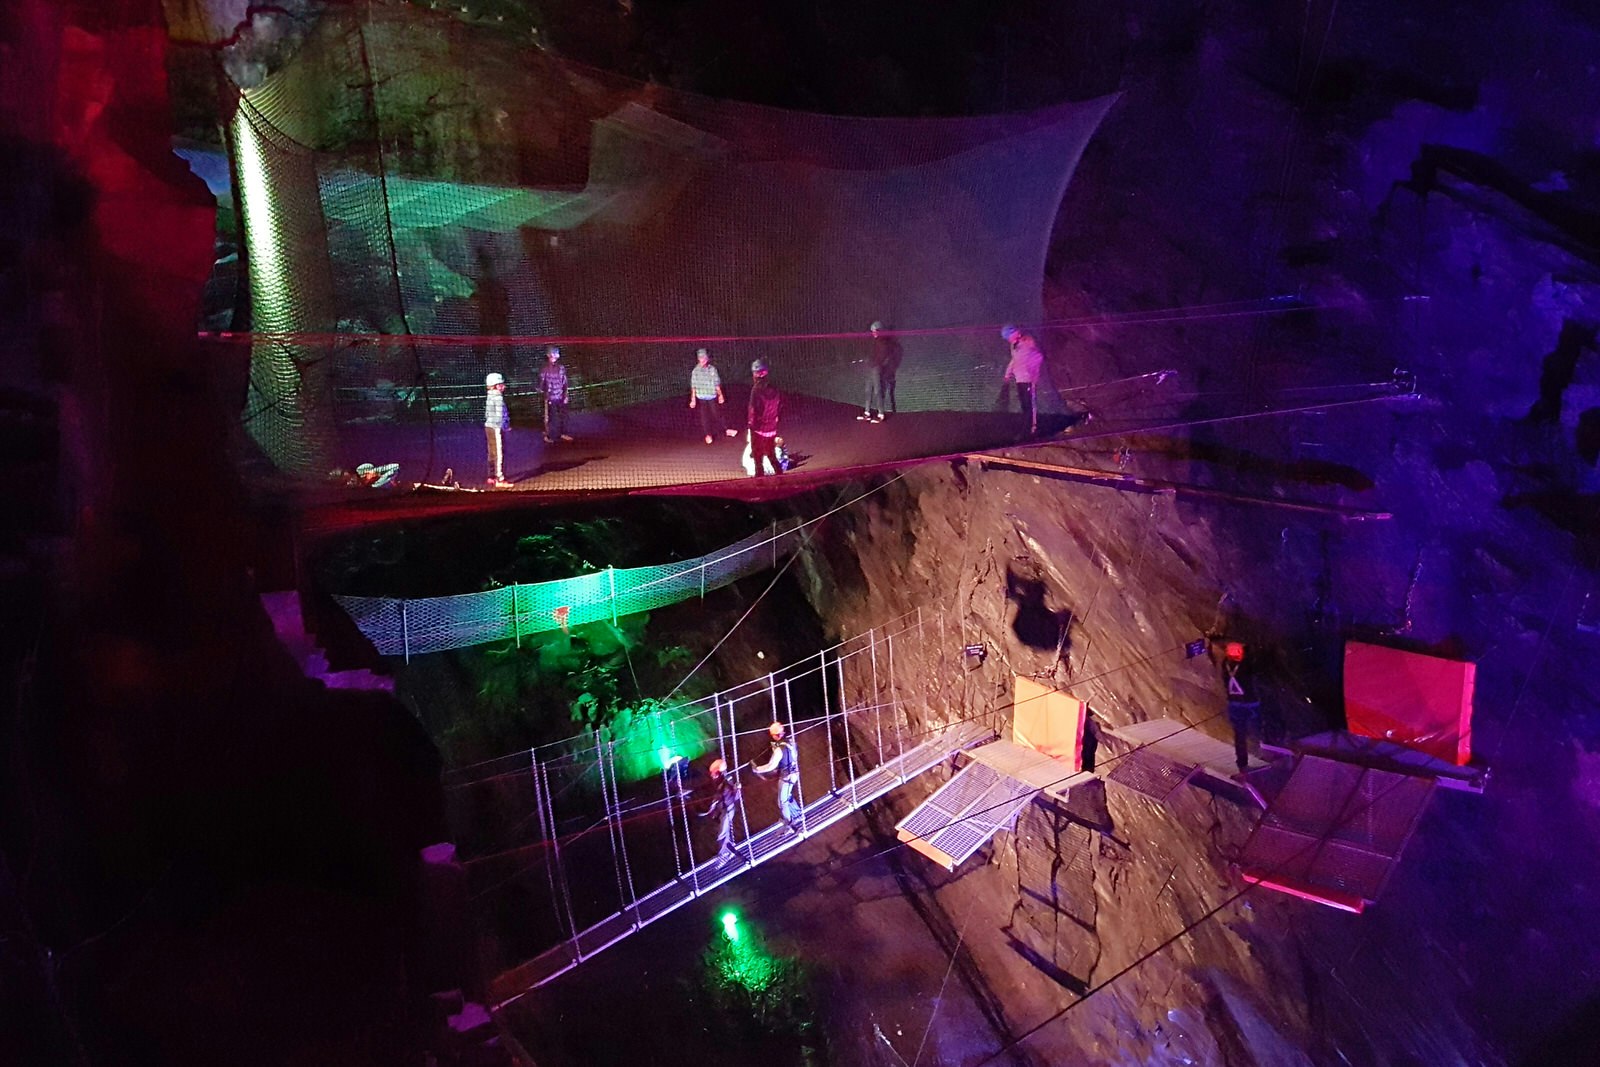 Trampolines and zip lines hang in cathedral-sized caves at Blaenau Ffestiniog © James Smart / Lonely Planet